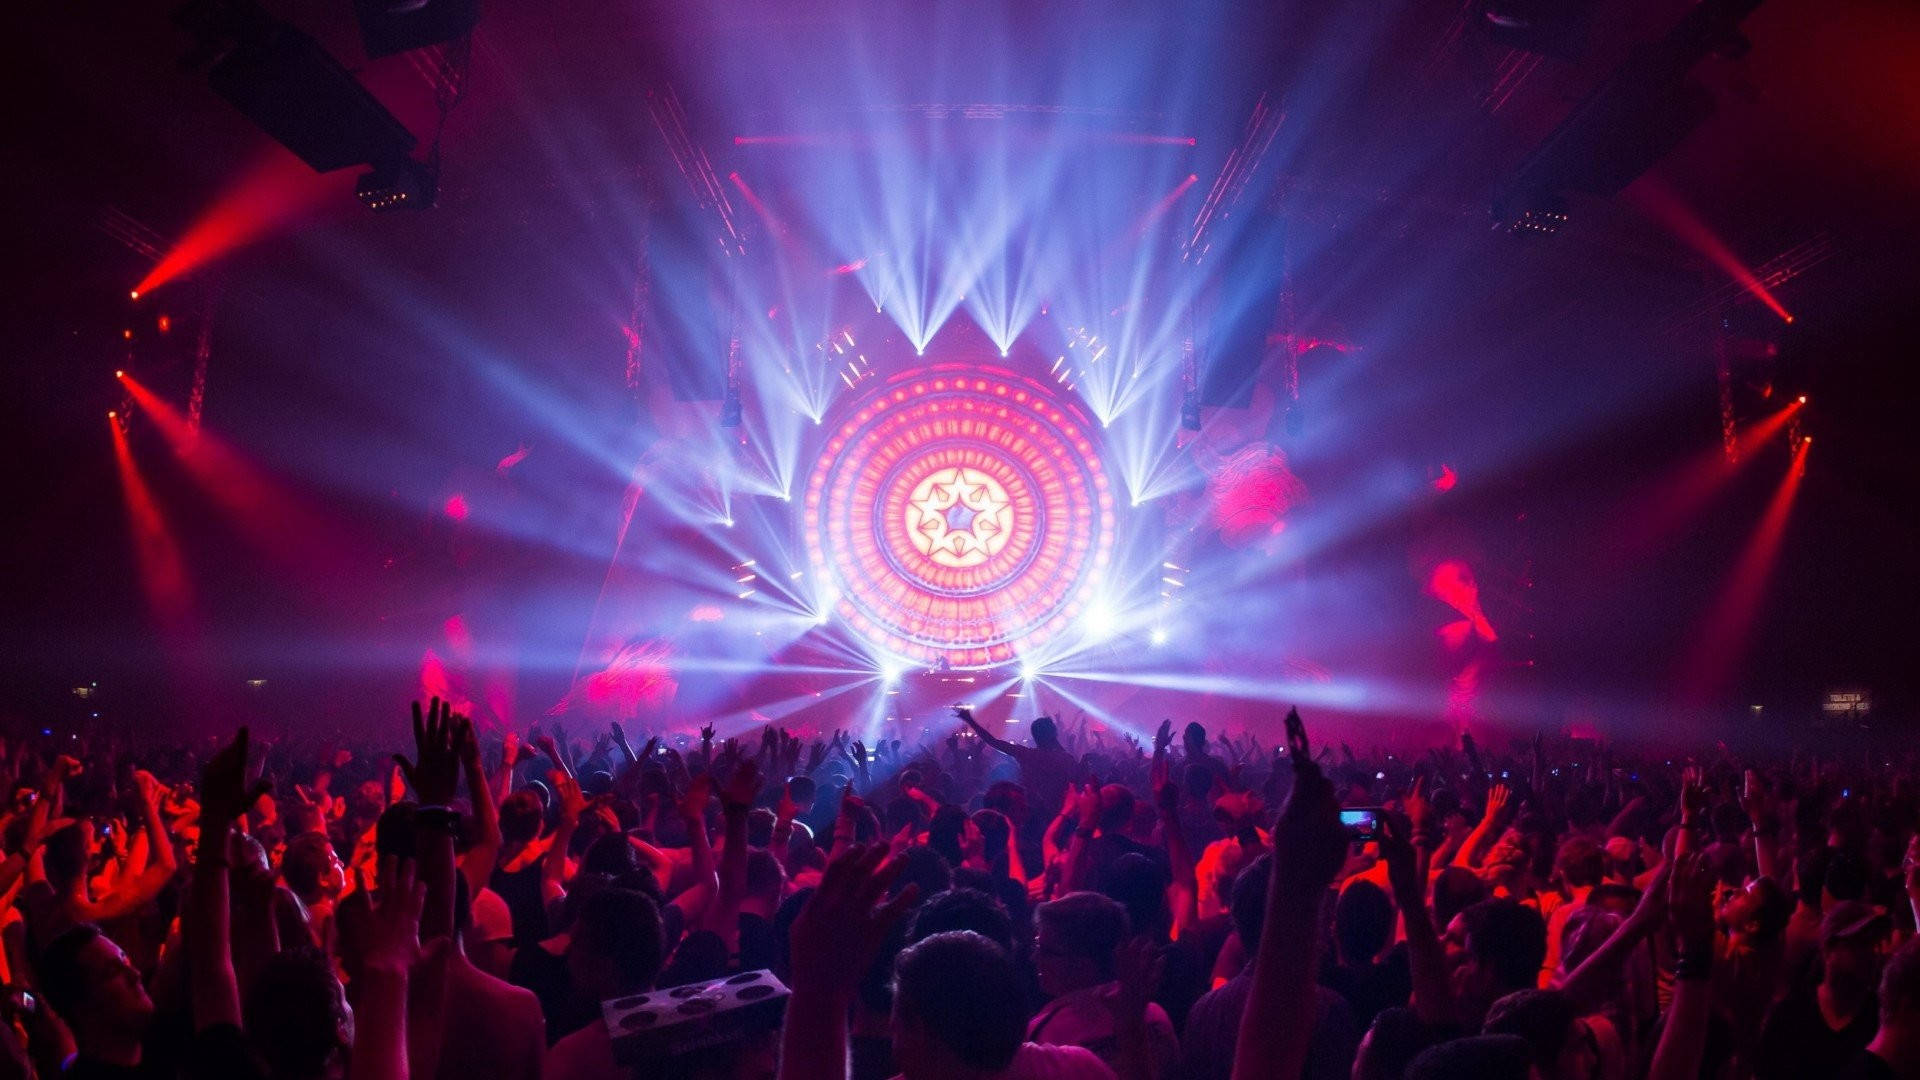 Wallpaper : digital art, rave, color, crowd, 1920x1080 px, nightclub  1920x1080 - CoolWallpapers - 565739 - HD Wallpapers - WallHere